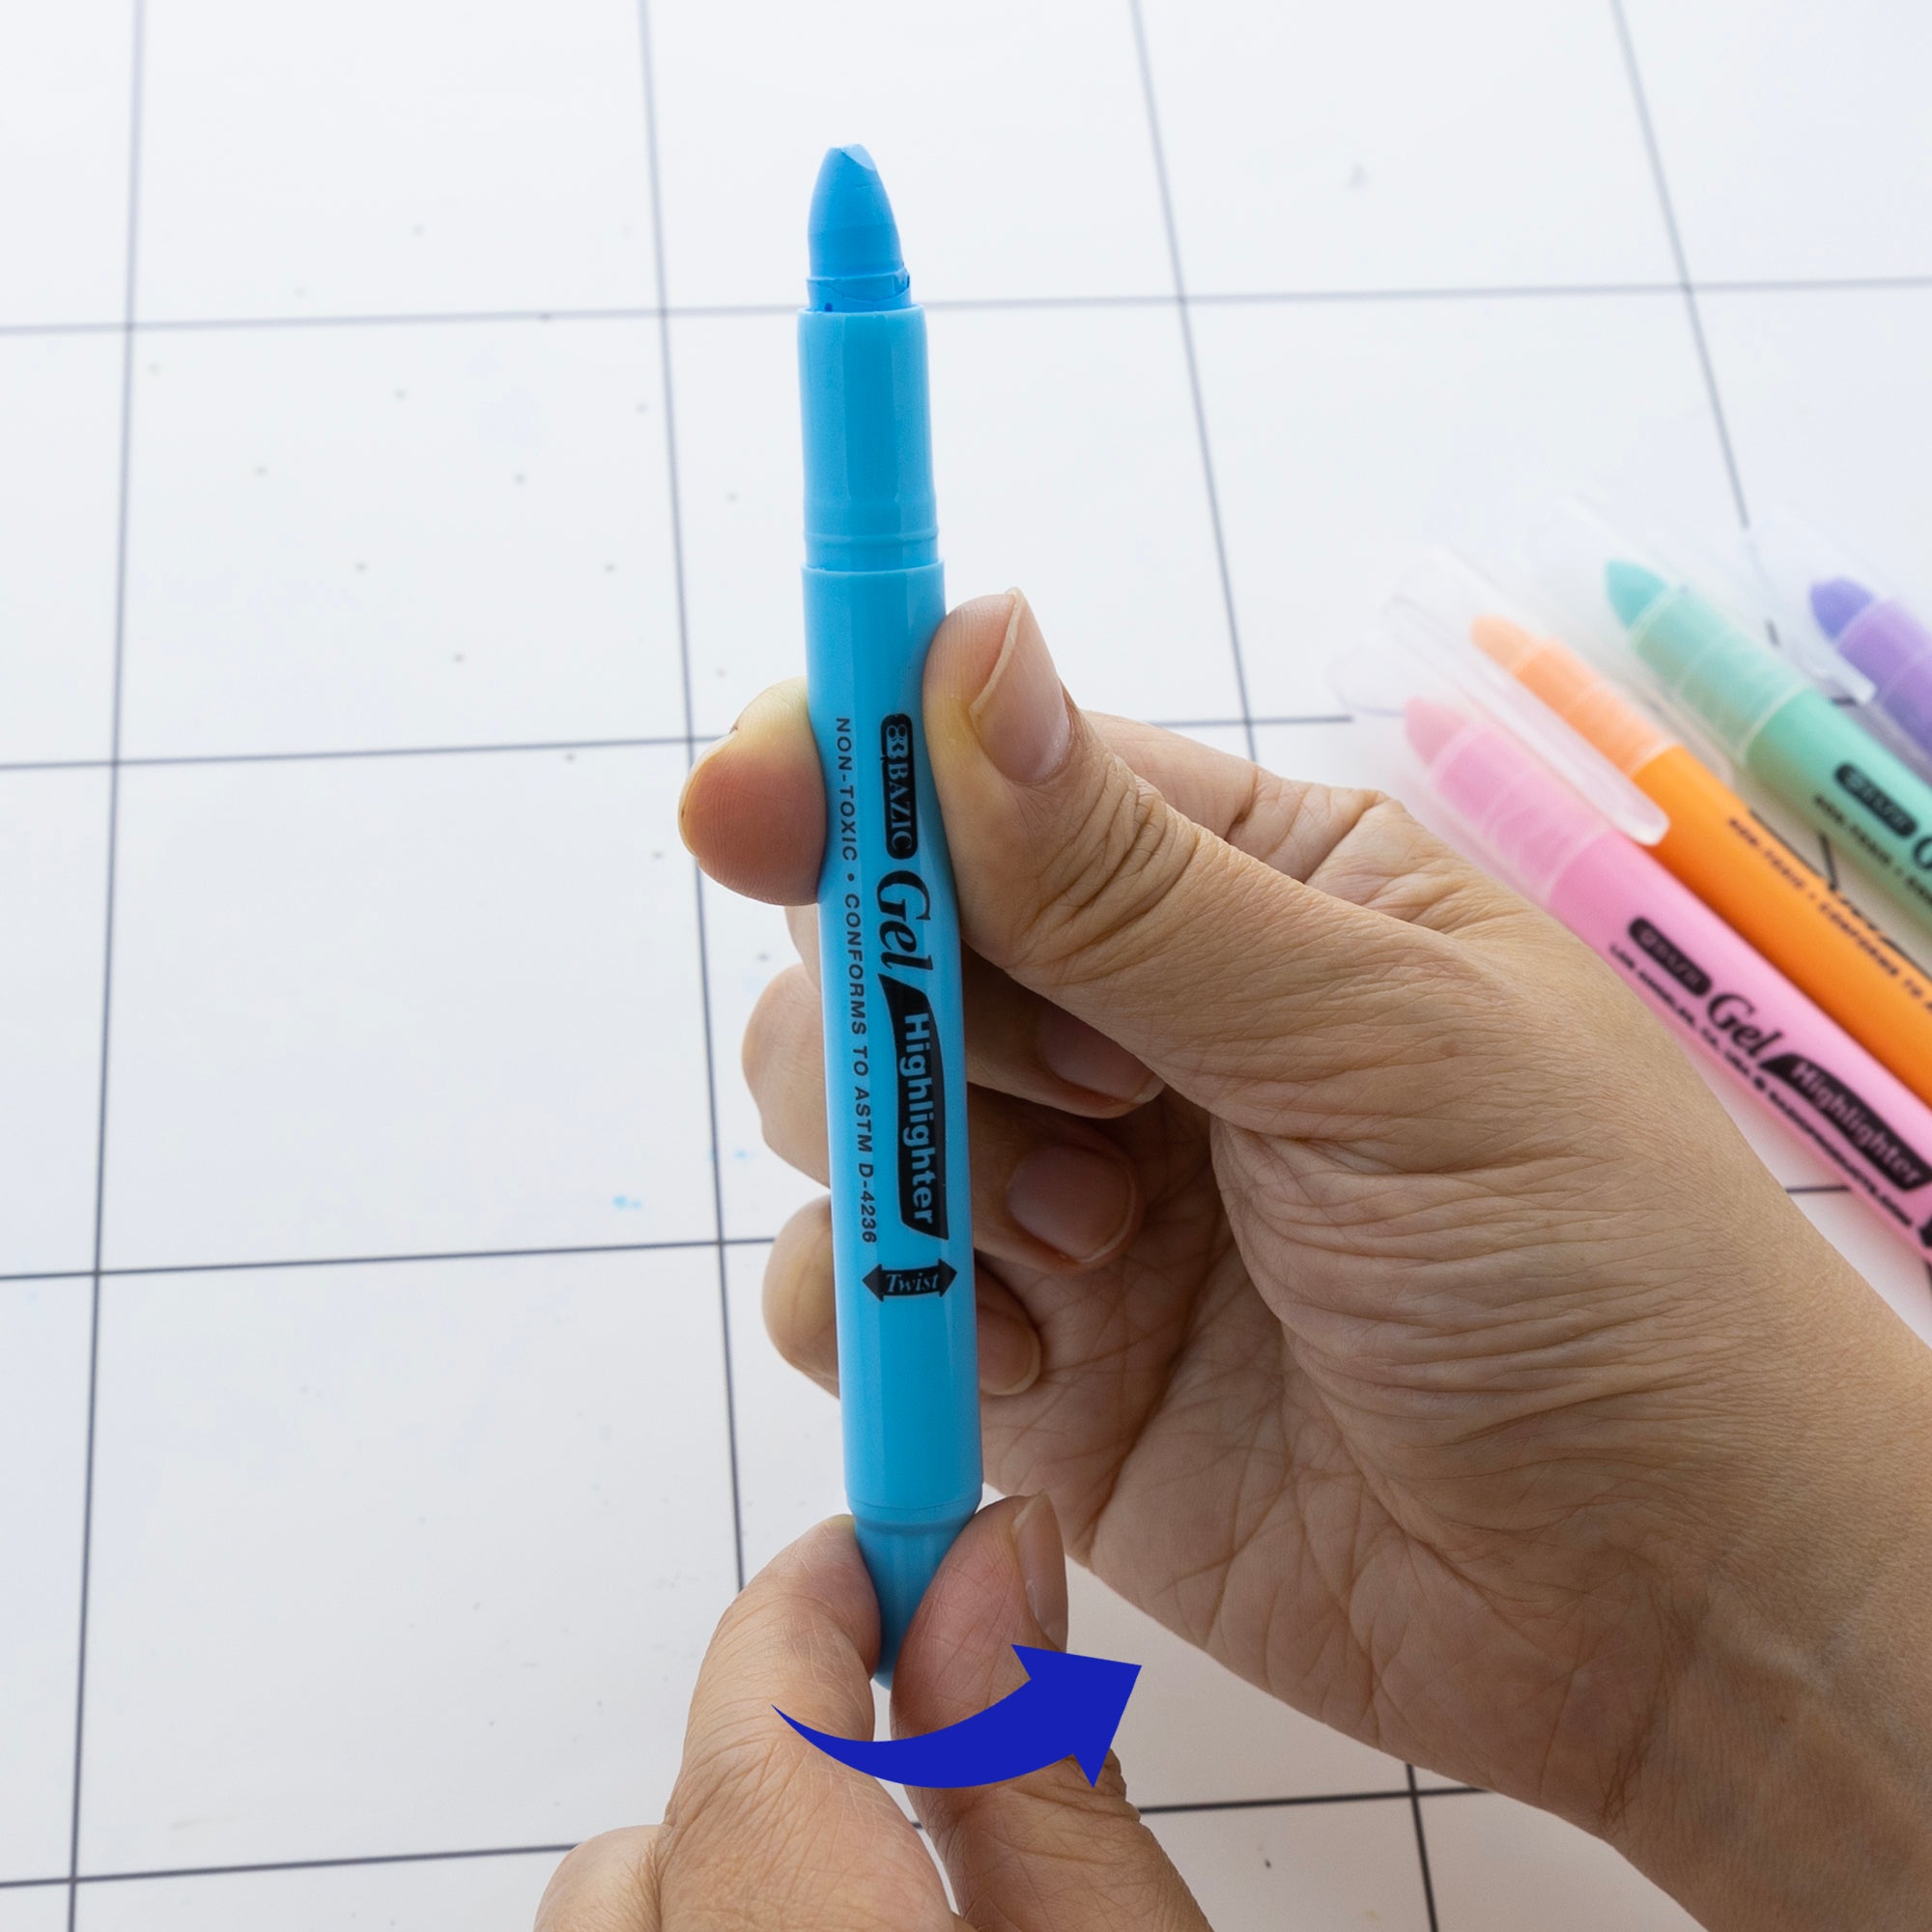 SHARPIE GEL HIGHLIGHTERS REVIEW: VIBRANT COLORS & PRECISION